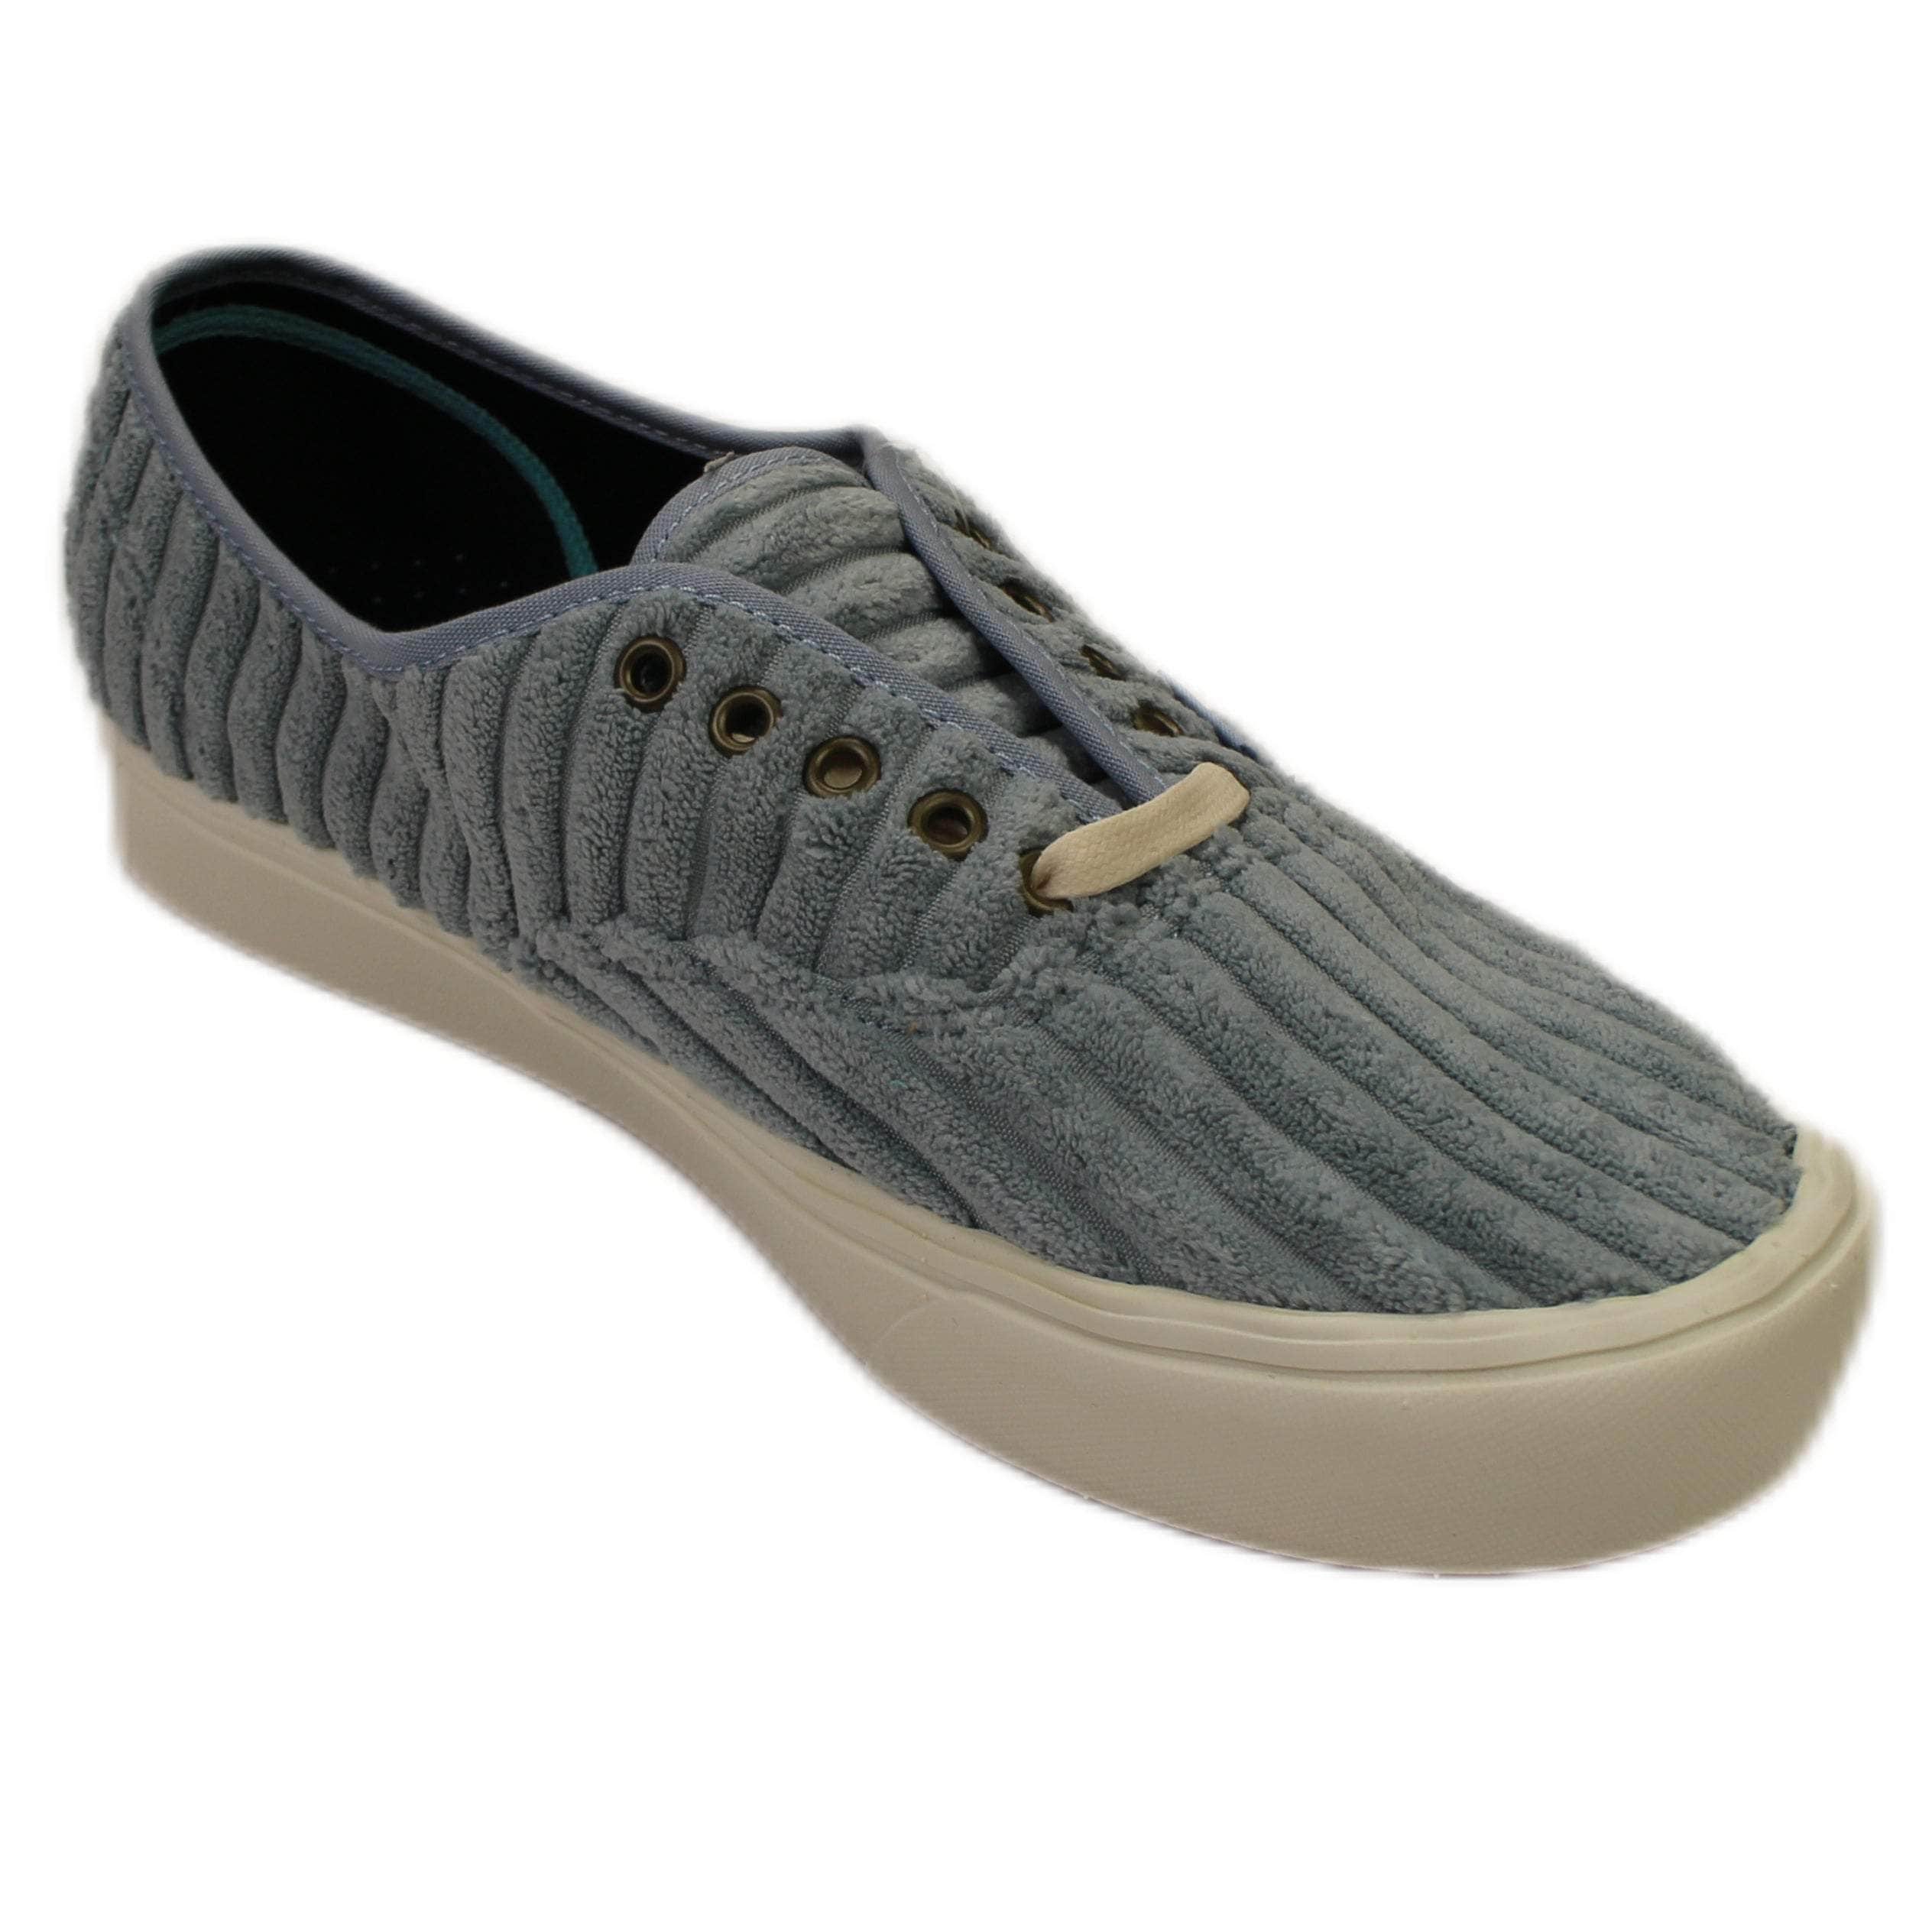 Vans channelenable-all, chicmi, couponcollection, main-shoes, shop375, size-12, under-250, unisex-sneakers 12 BLUE U COMFYCUSH AUTHENTIC SNEAKERS 95-VNS-2008/12 95-VNS-2008/12